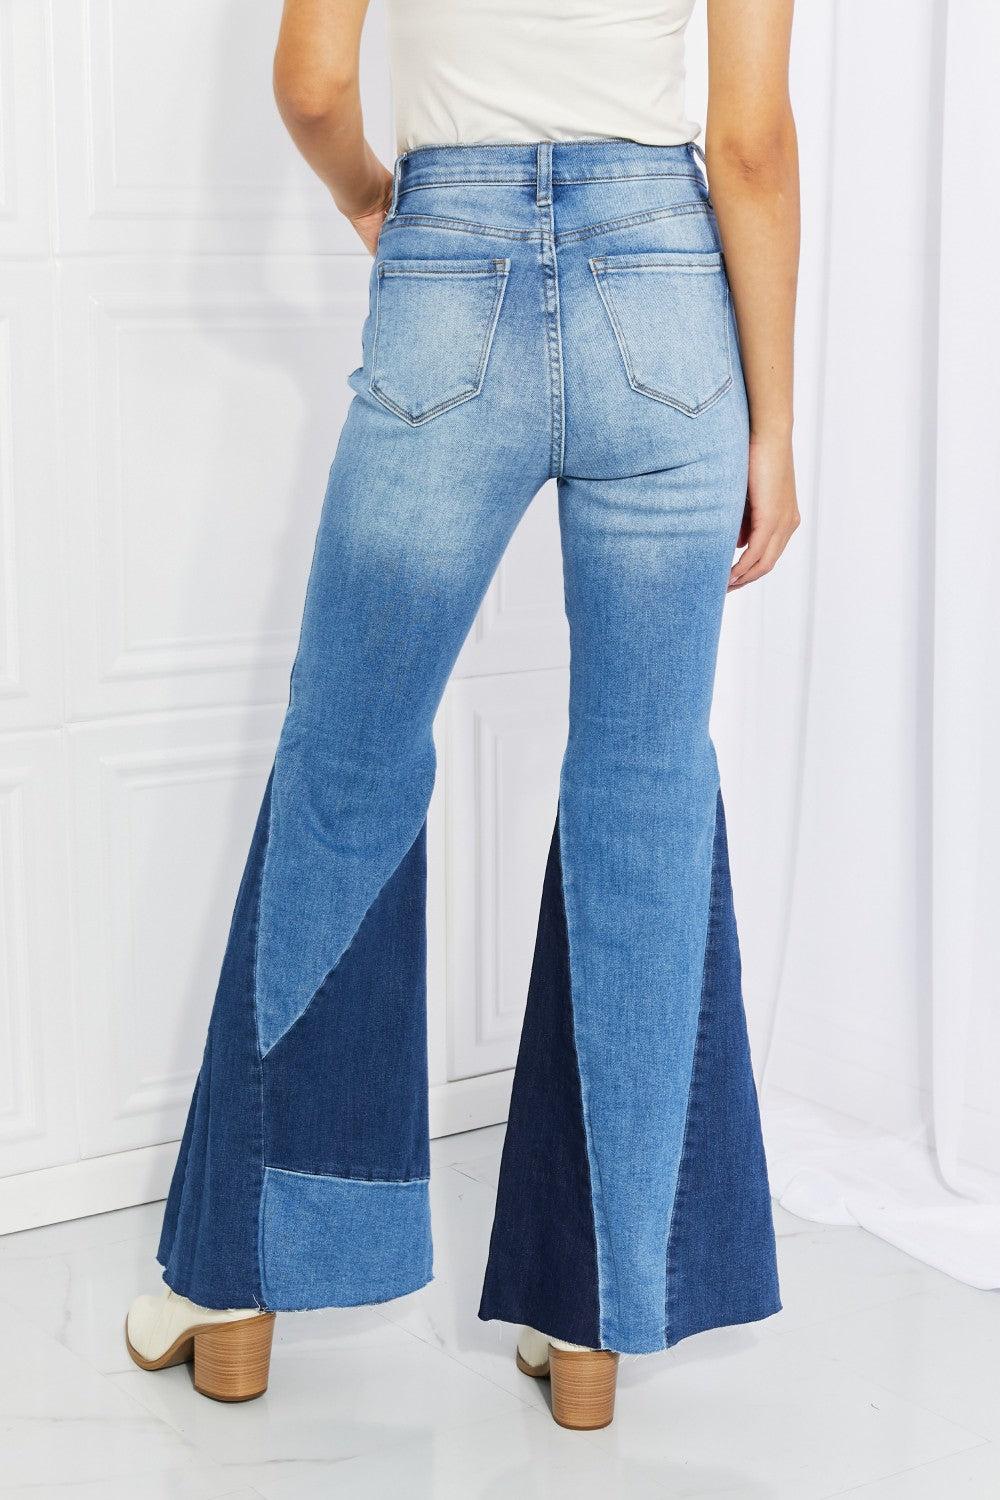 Full Size Color Block Flare Jeans Pants